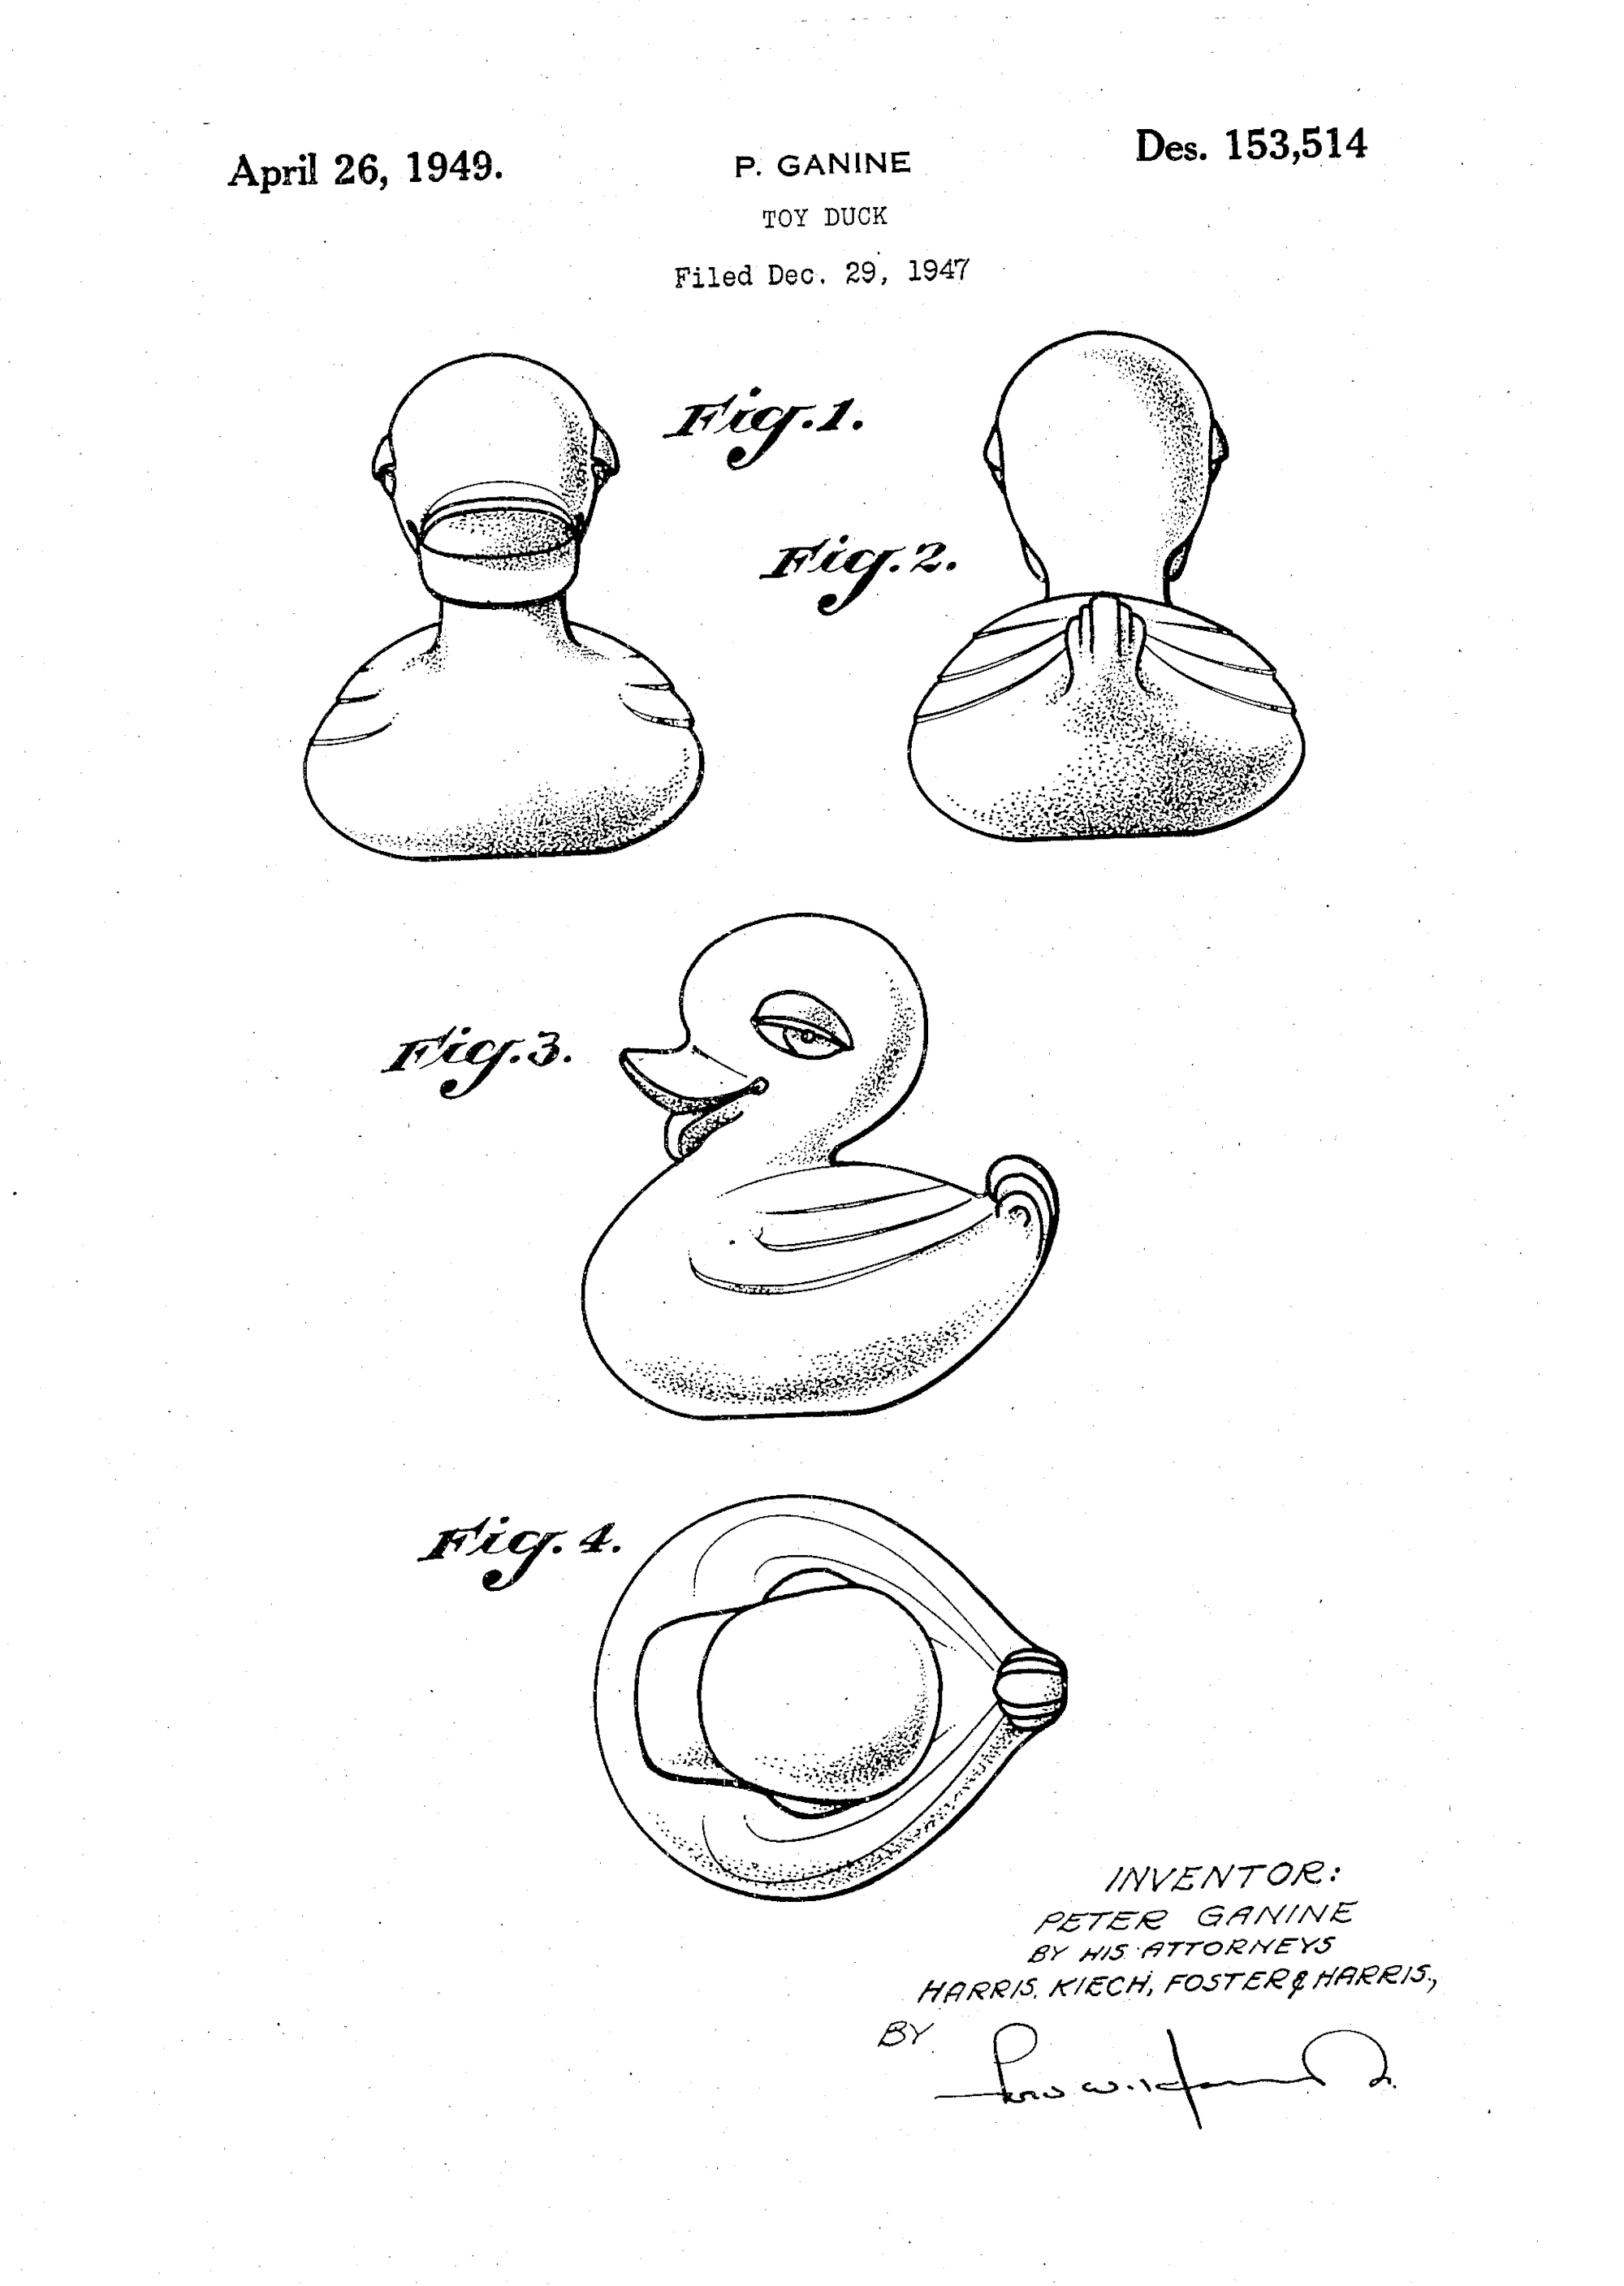 Toy Duck, Peter Ganine, 1947/1949. Patent Number: USD 153,514, U.S. Patent Office 